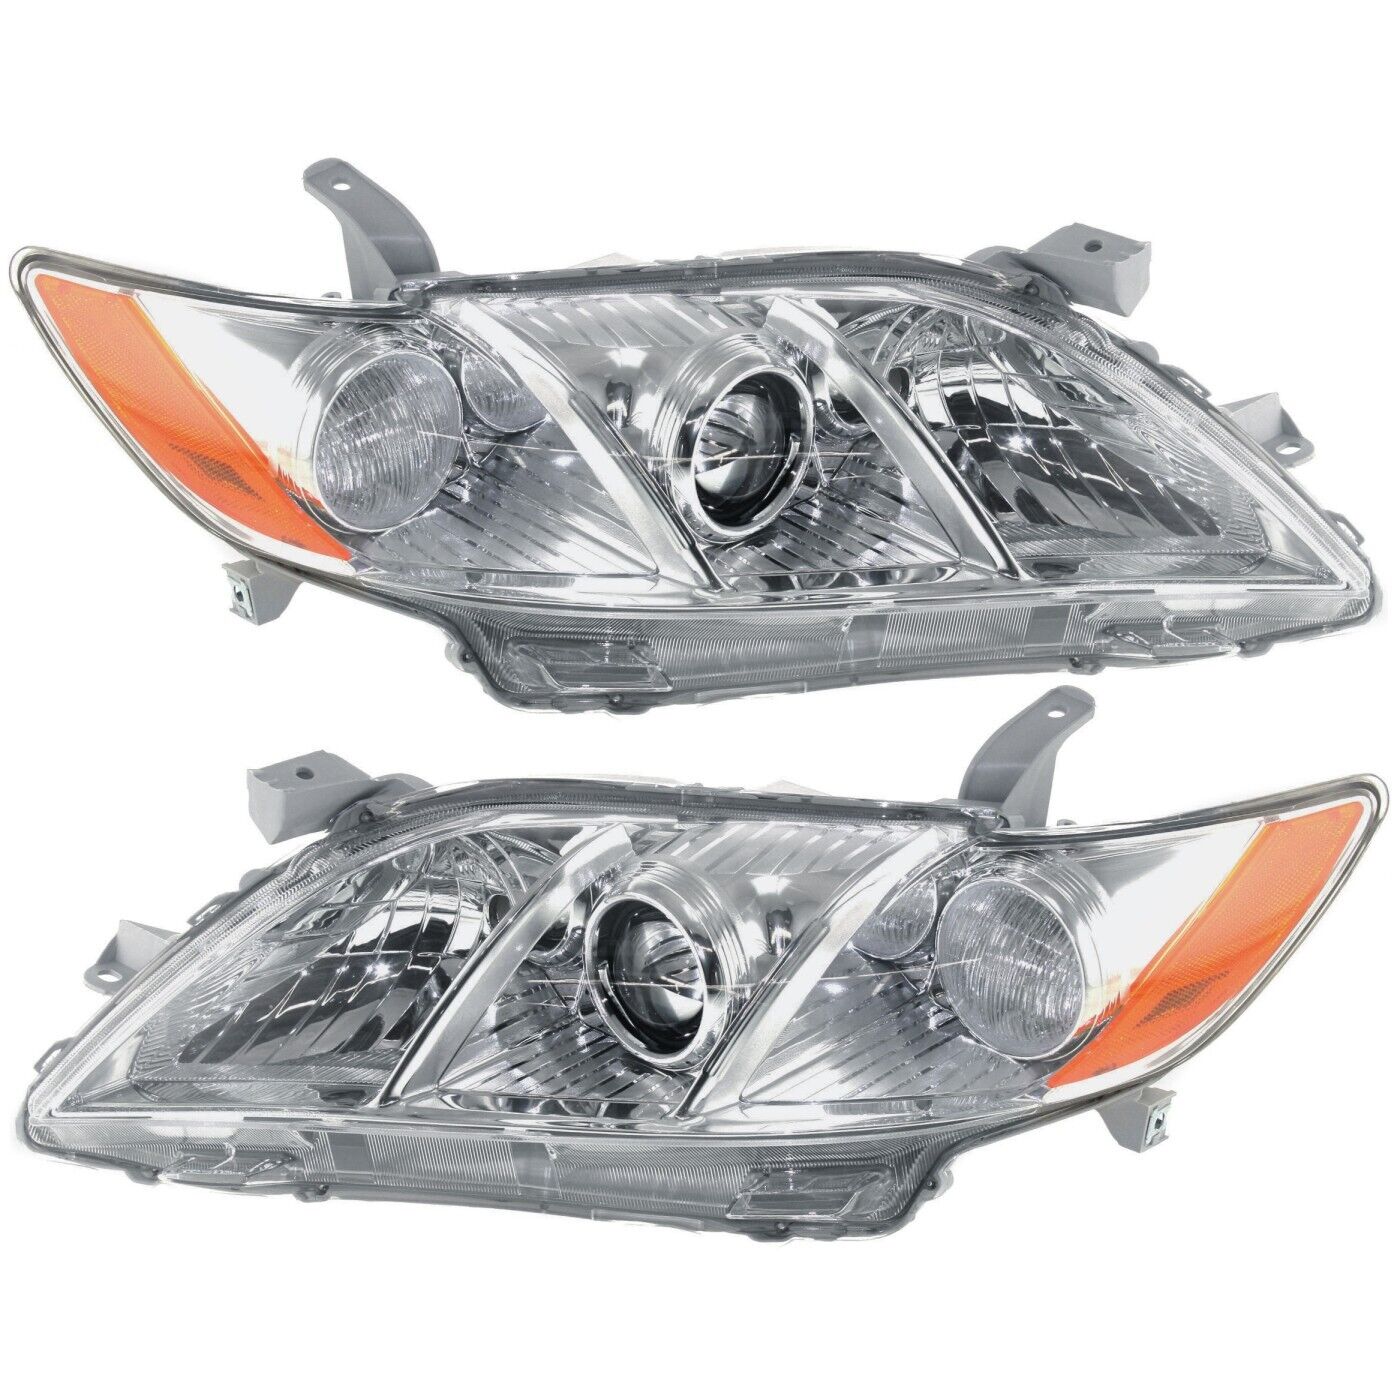 Headlight Assembly Set For 2007-2009 Toyota Camry Left and Right Sedan USA Built